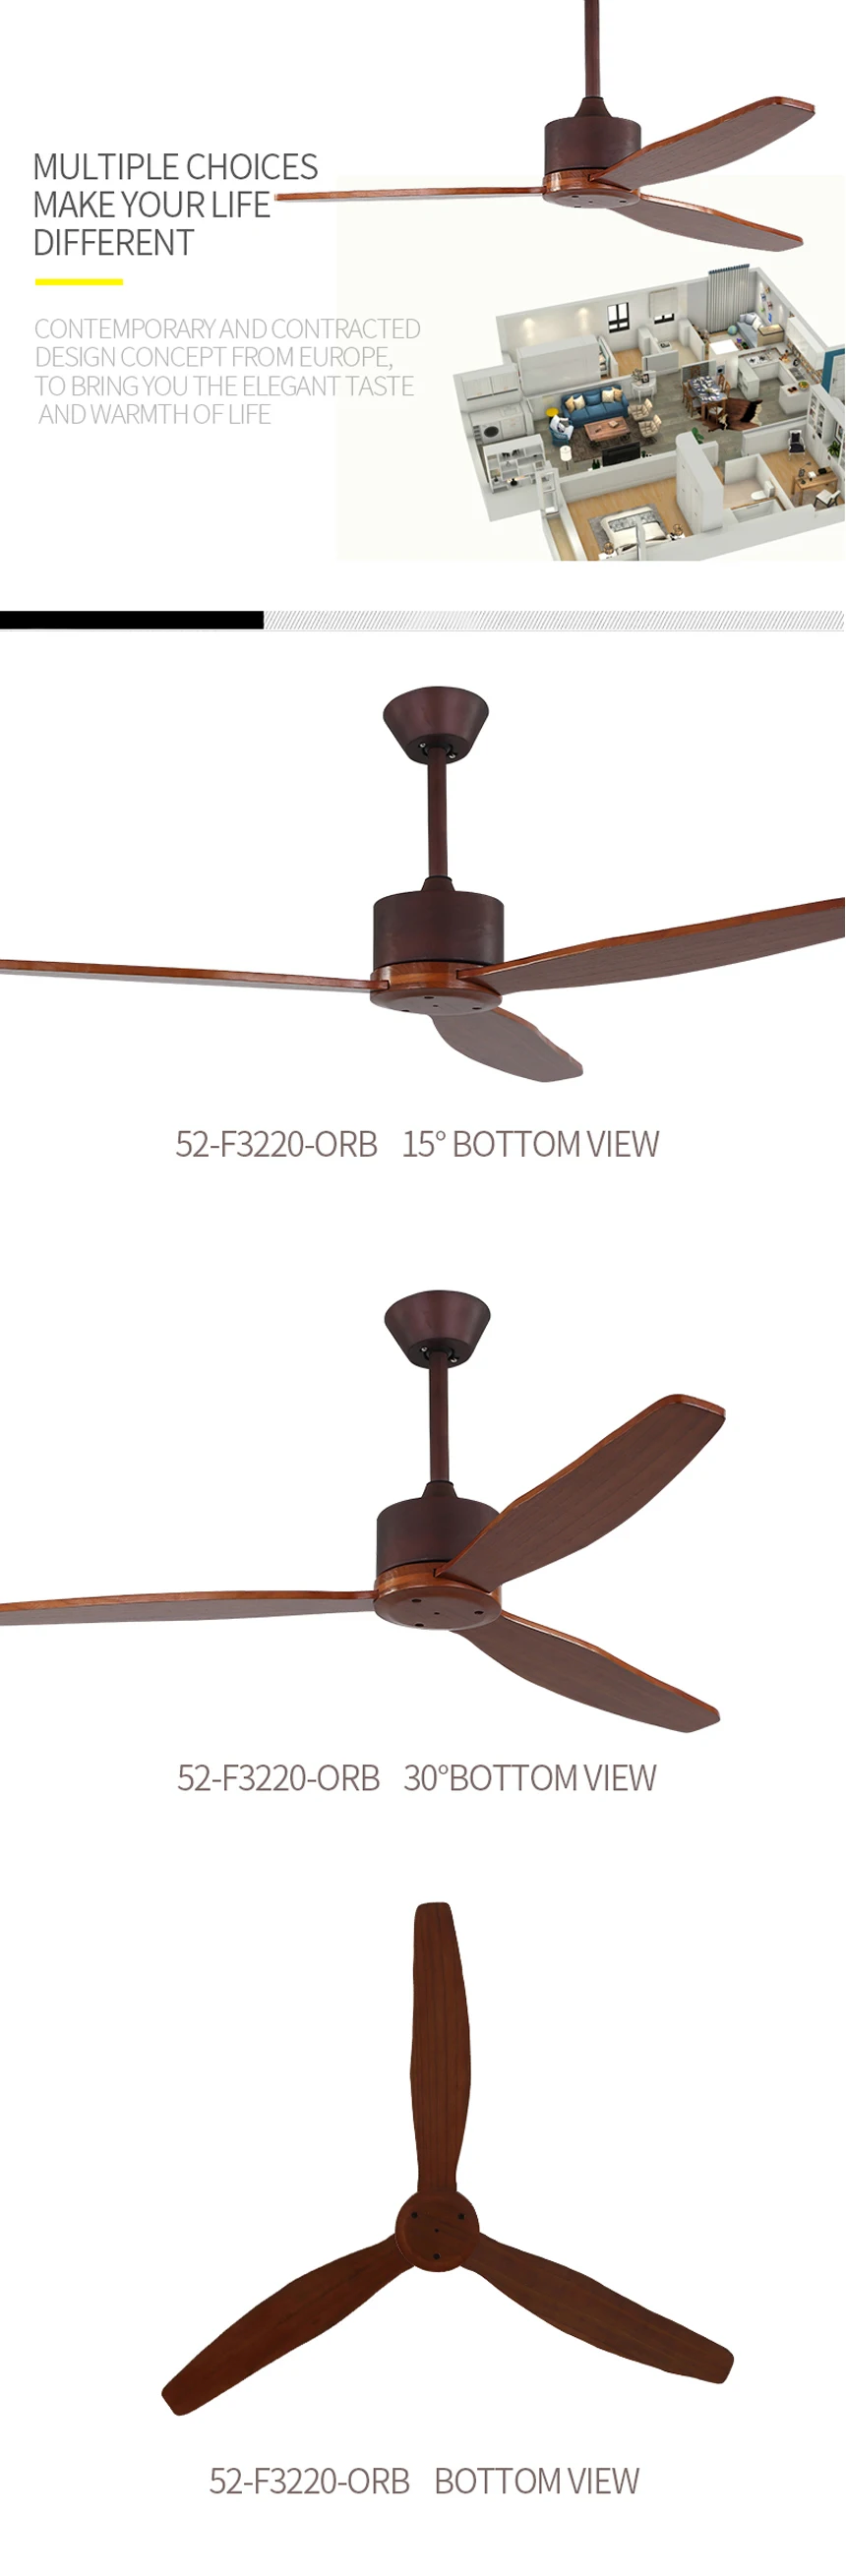 2017 hot selling products competitive price ceiling fan with light